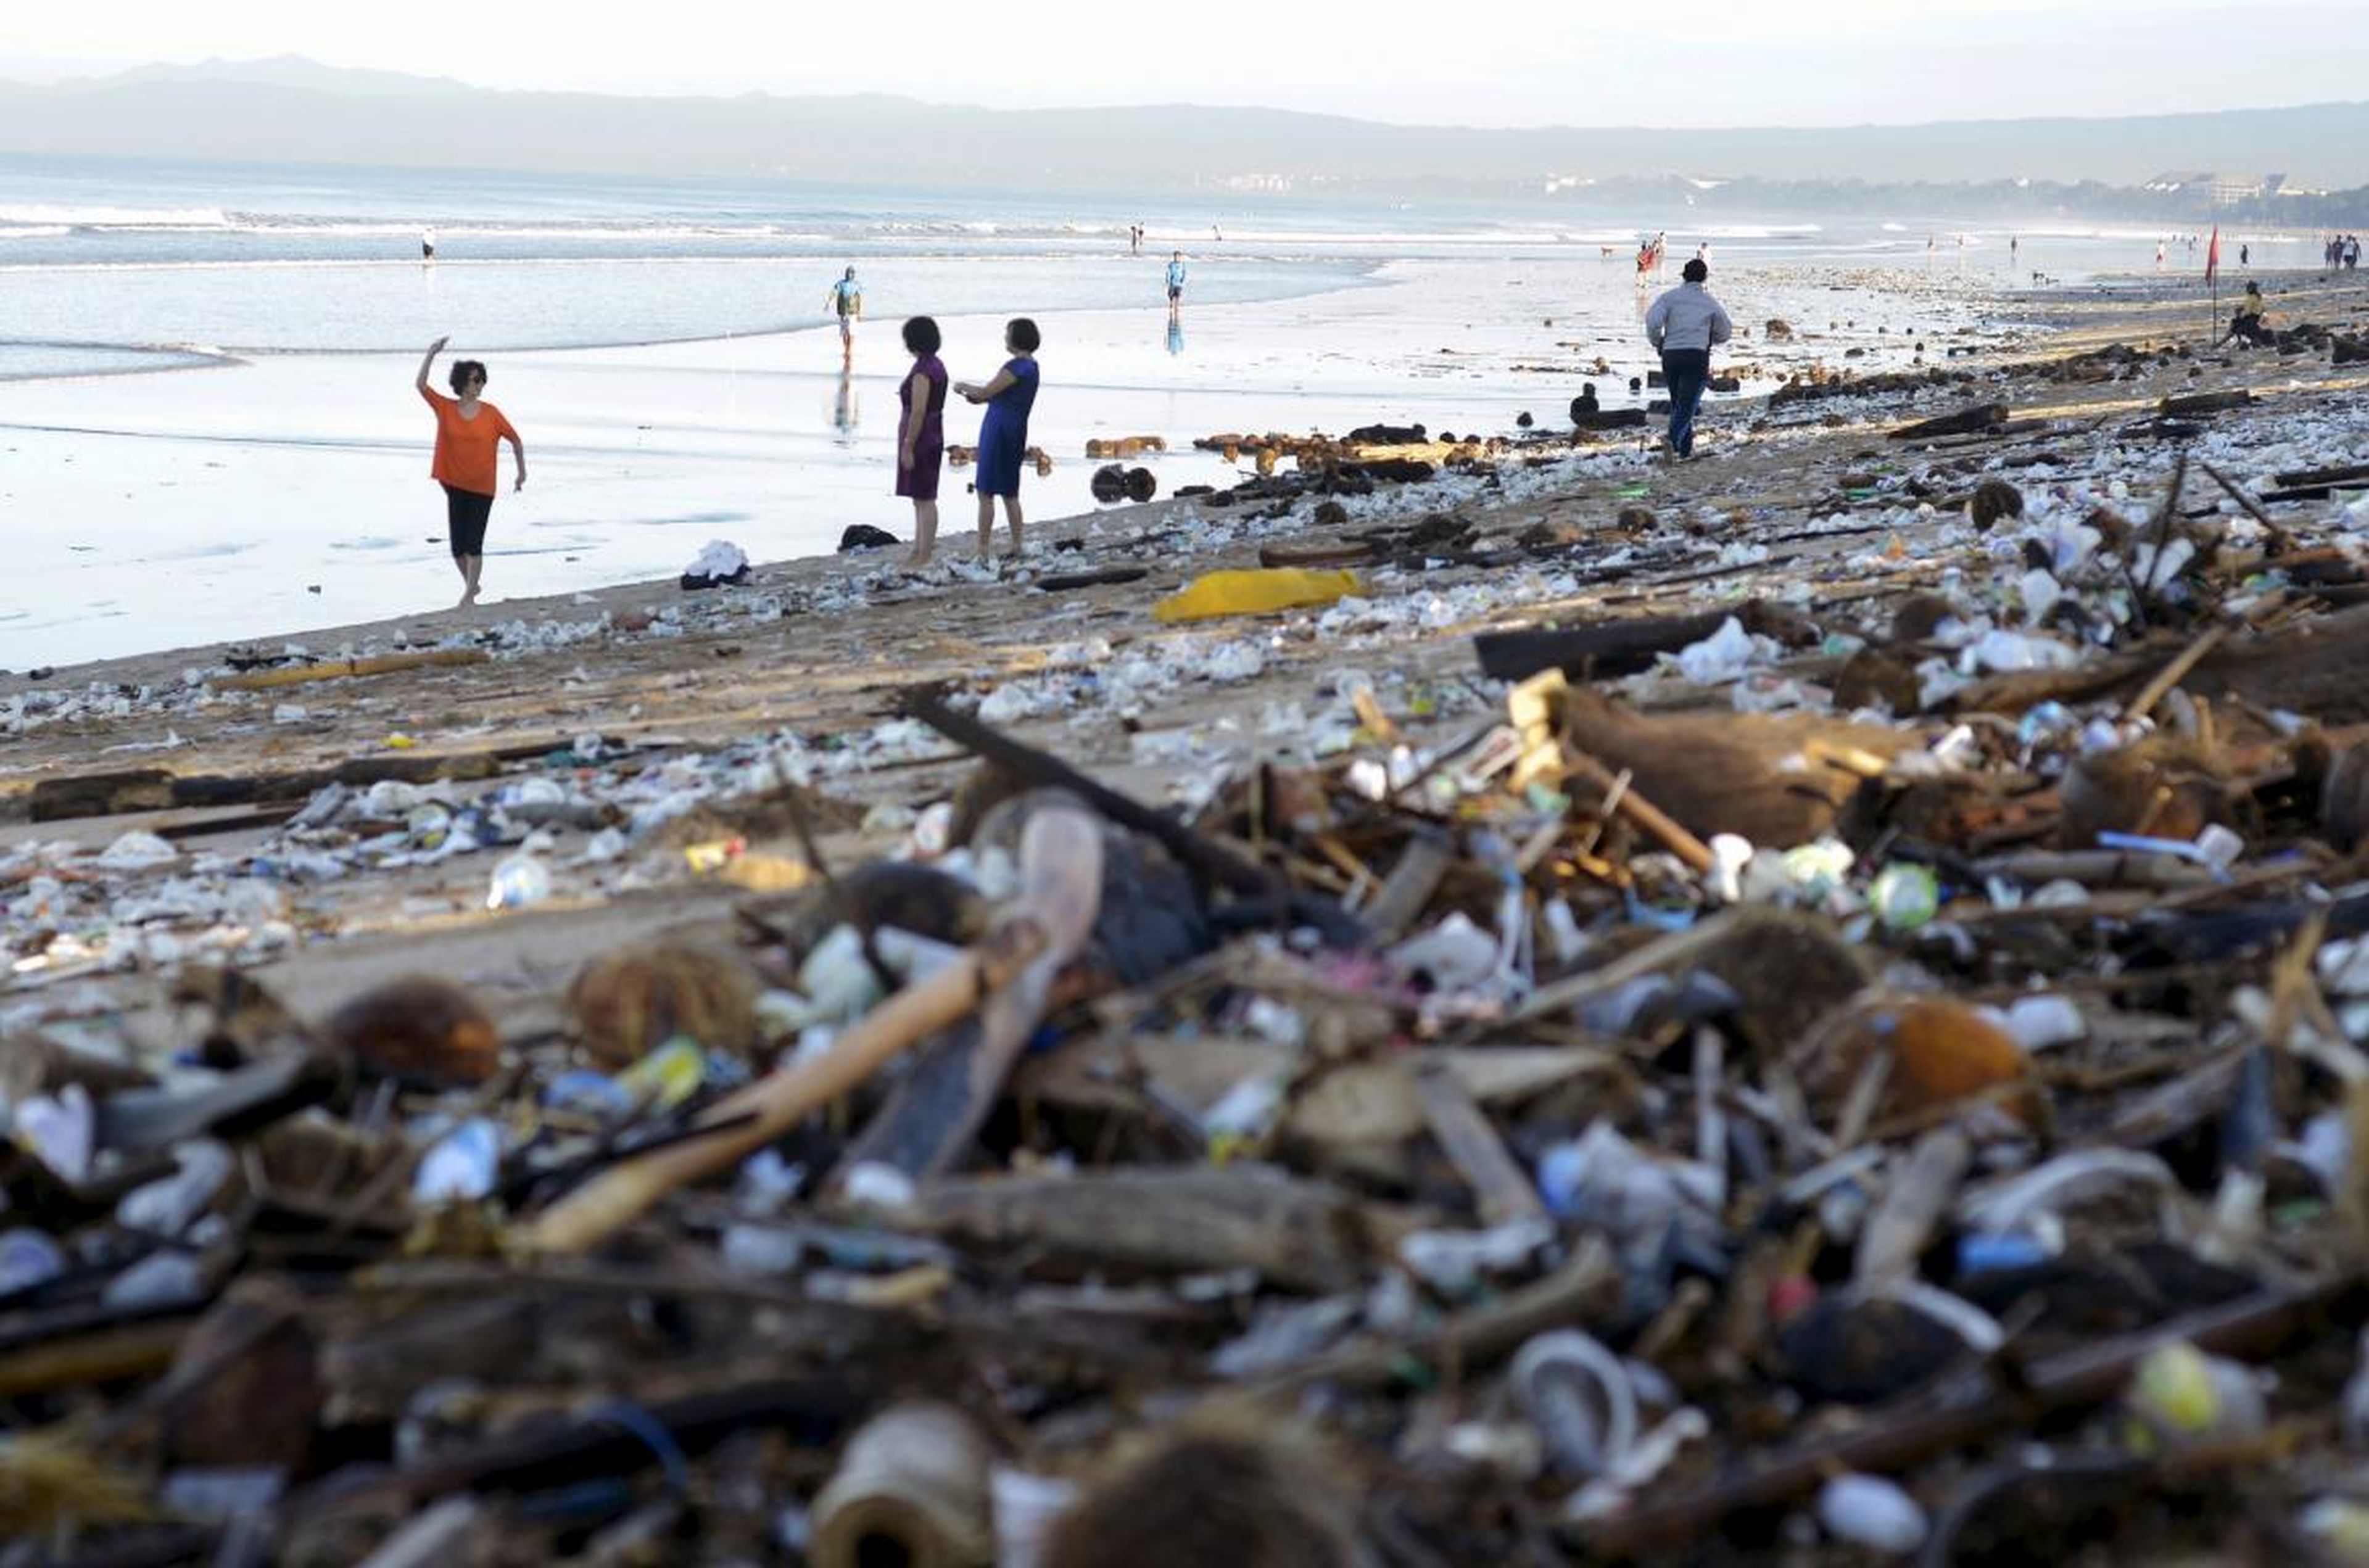 More visitors to Bali means more garbage, too.